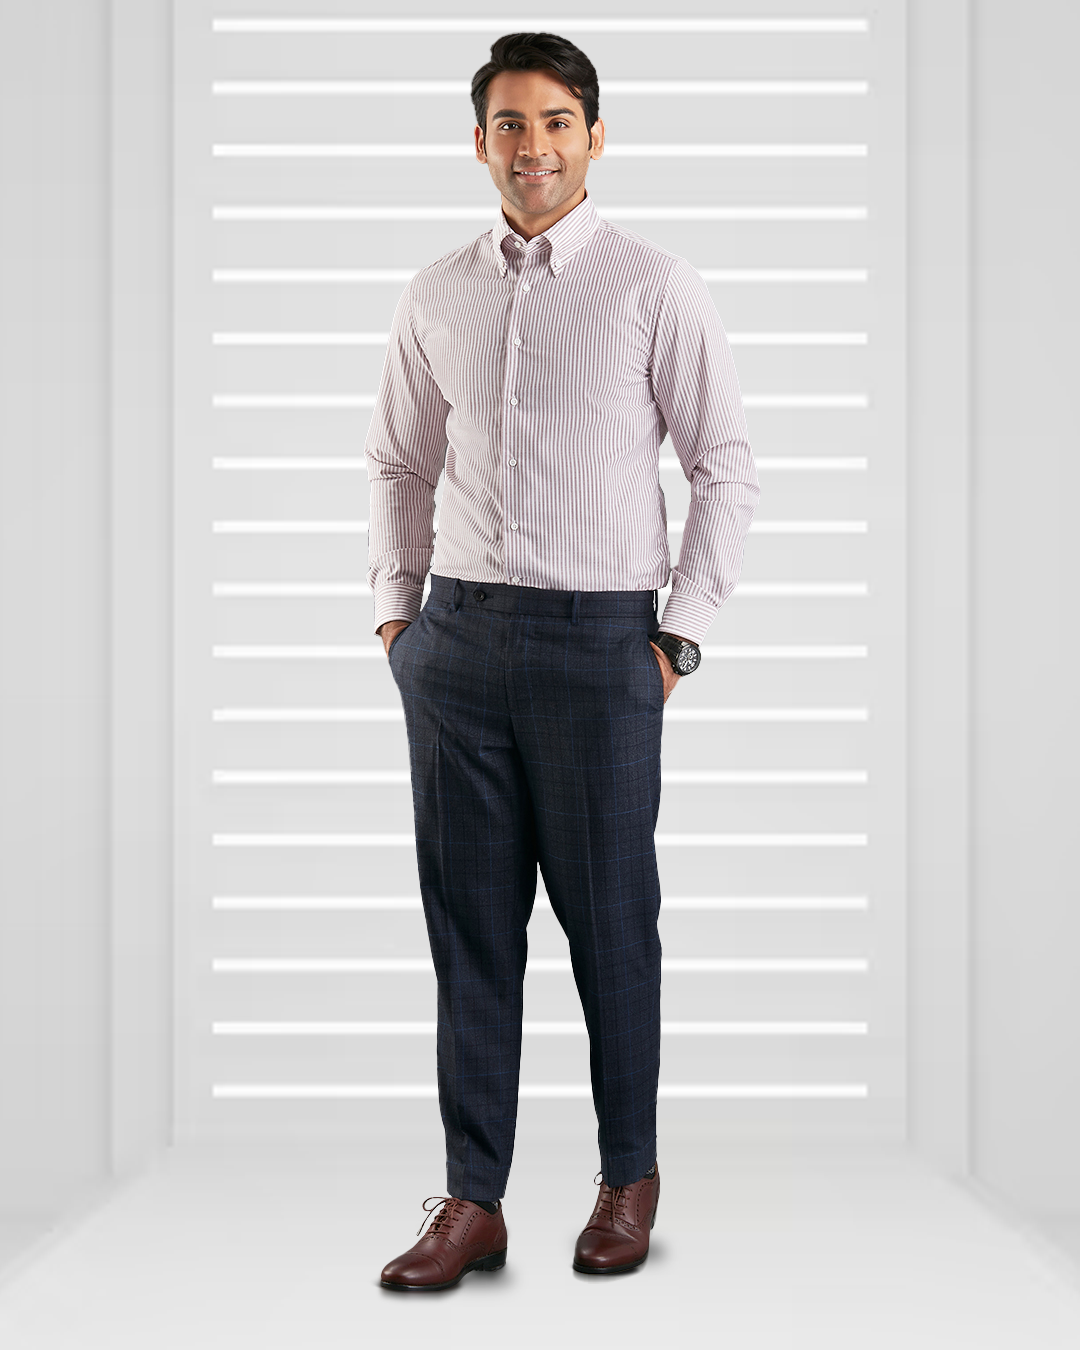 Model wearing the custom oxford shirt for men by Luxire in white with maroon university stripes hands in pockets